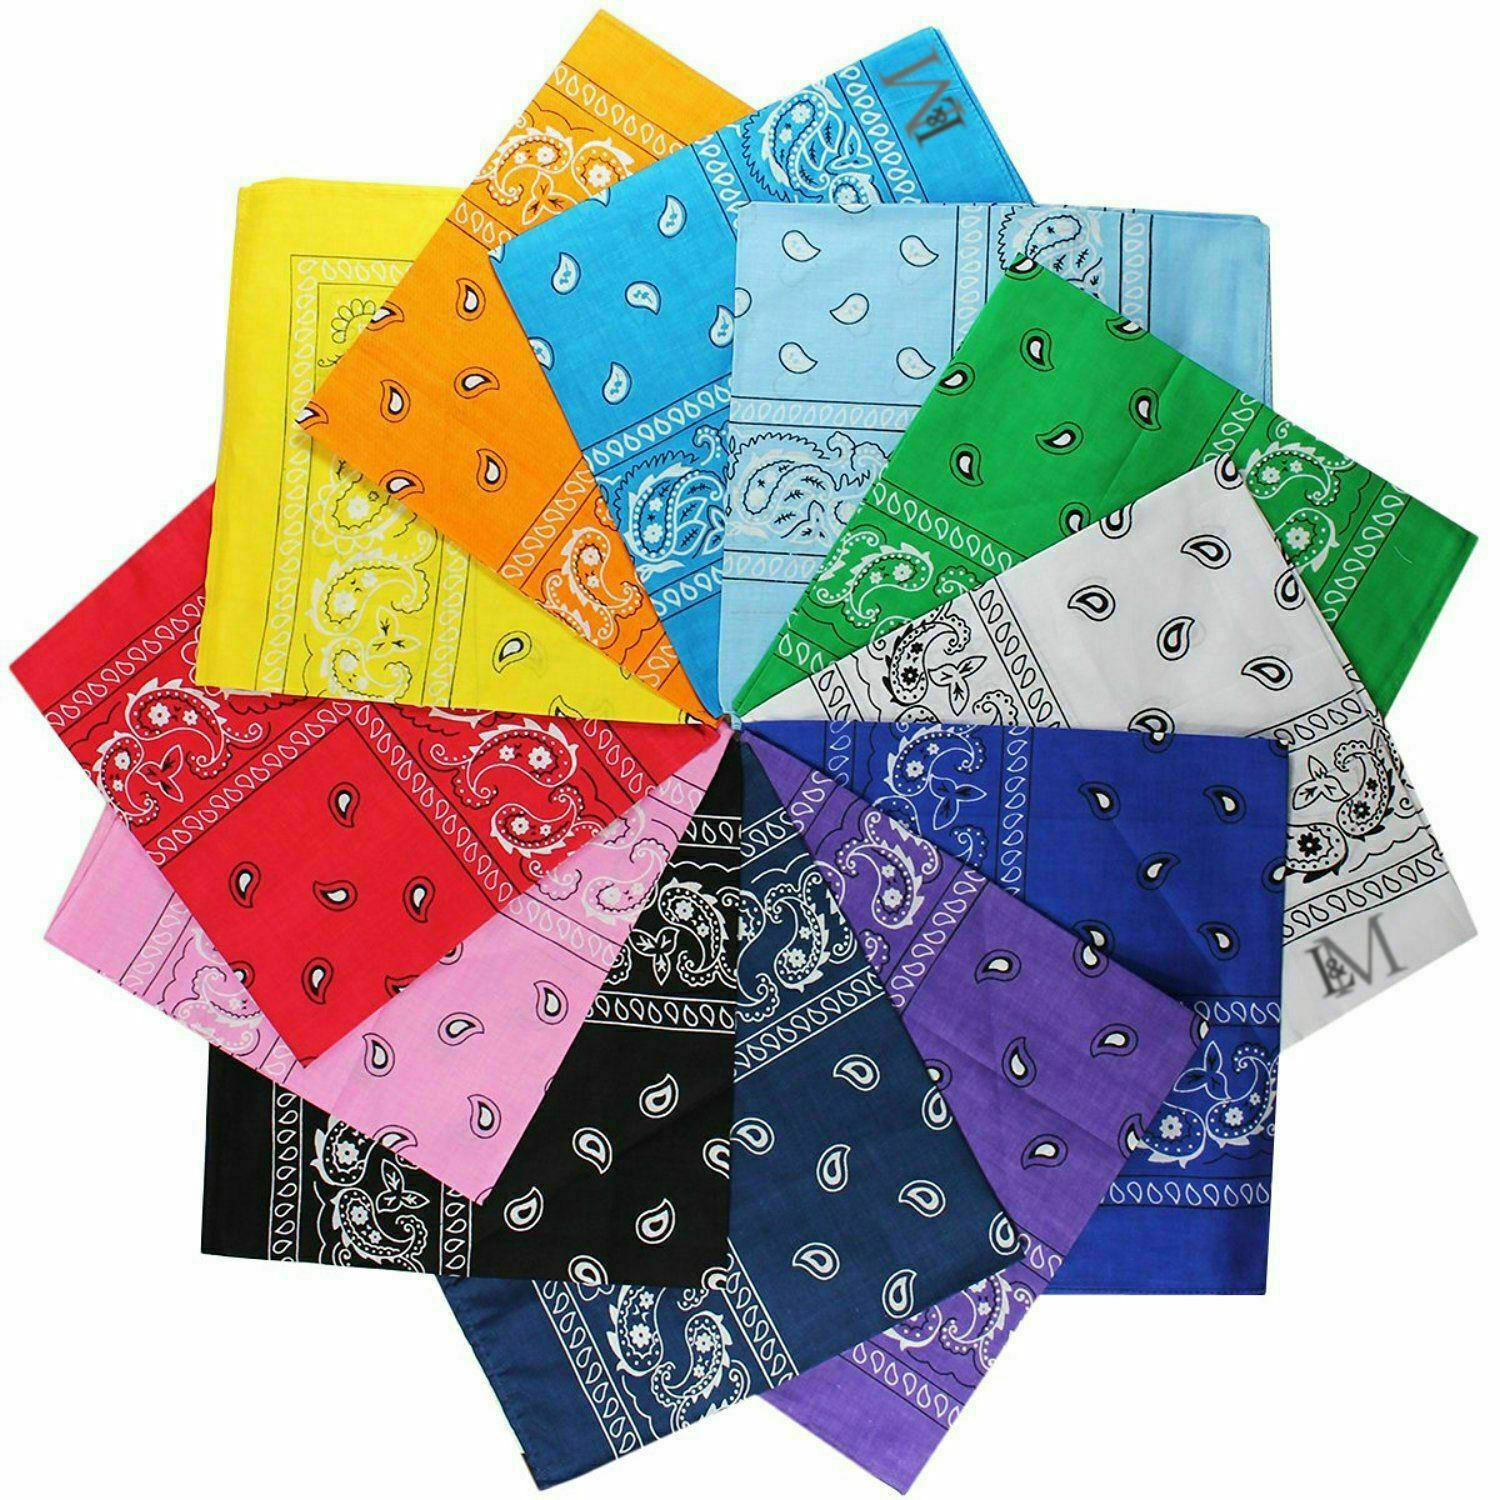 Lot Of 6 Mixed Bandana 100% Cotton Head Face Wrap W Paisley Mask Super popular specialty store Super Special SALE held